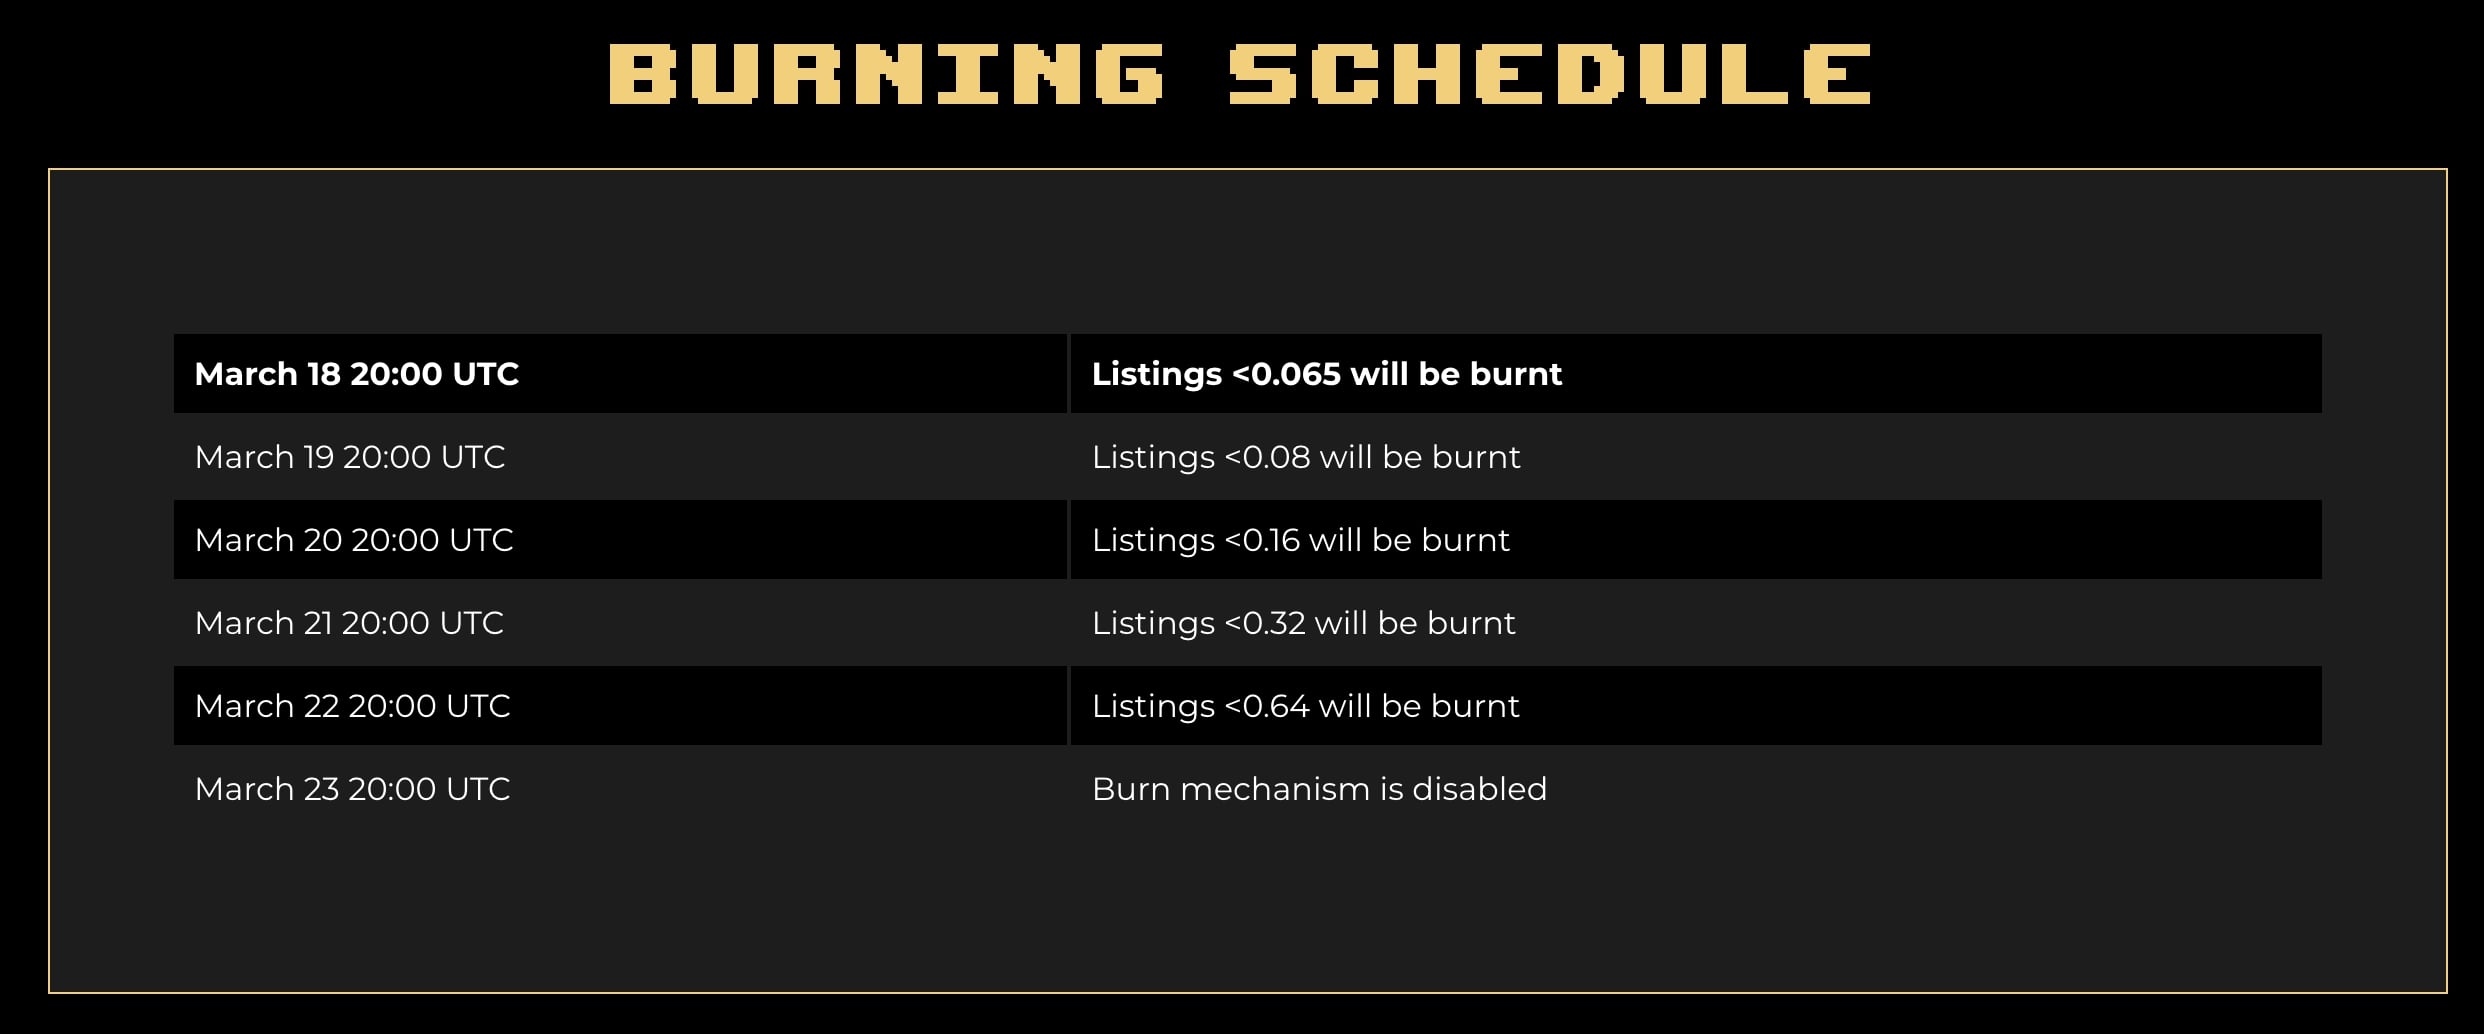 burning schedule with dates and prices